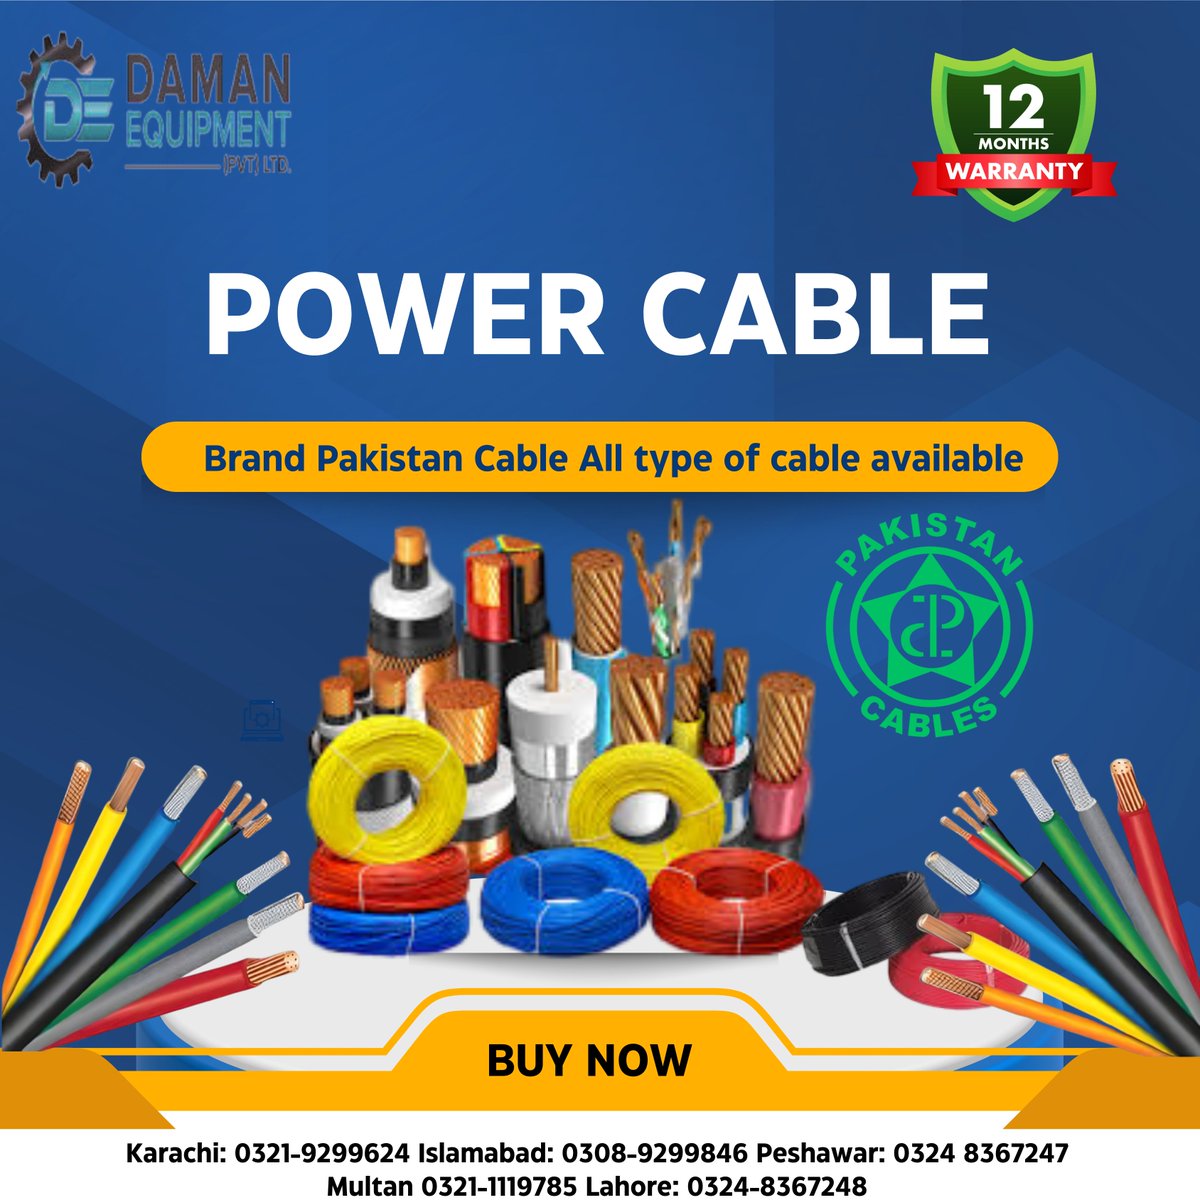 Power Cable With 12 Months Warranty

#powercable #cable #pakistancable #cablemanagement #powercables #powercableenergy #powercableinpakistan #powercableinkarachi